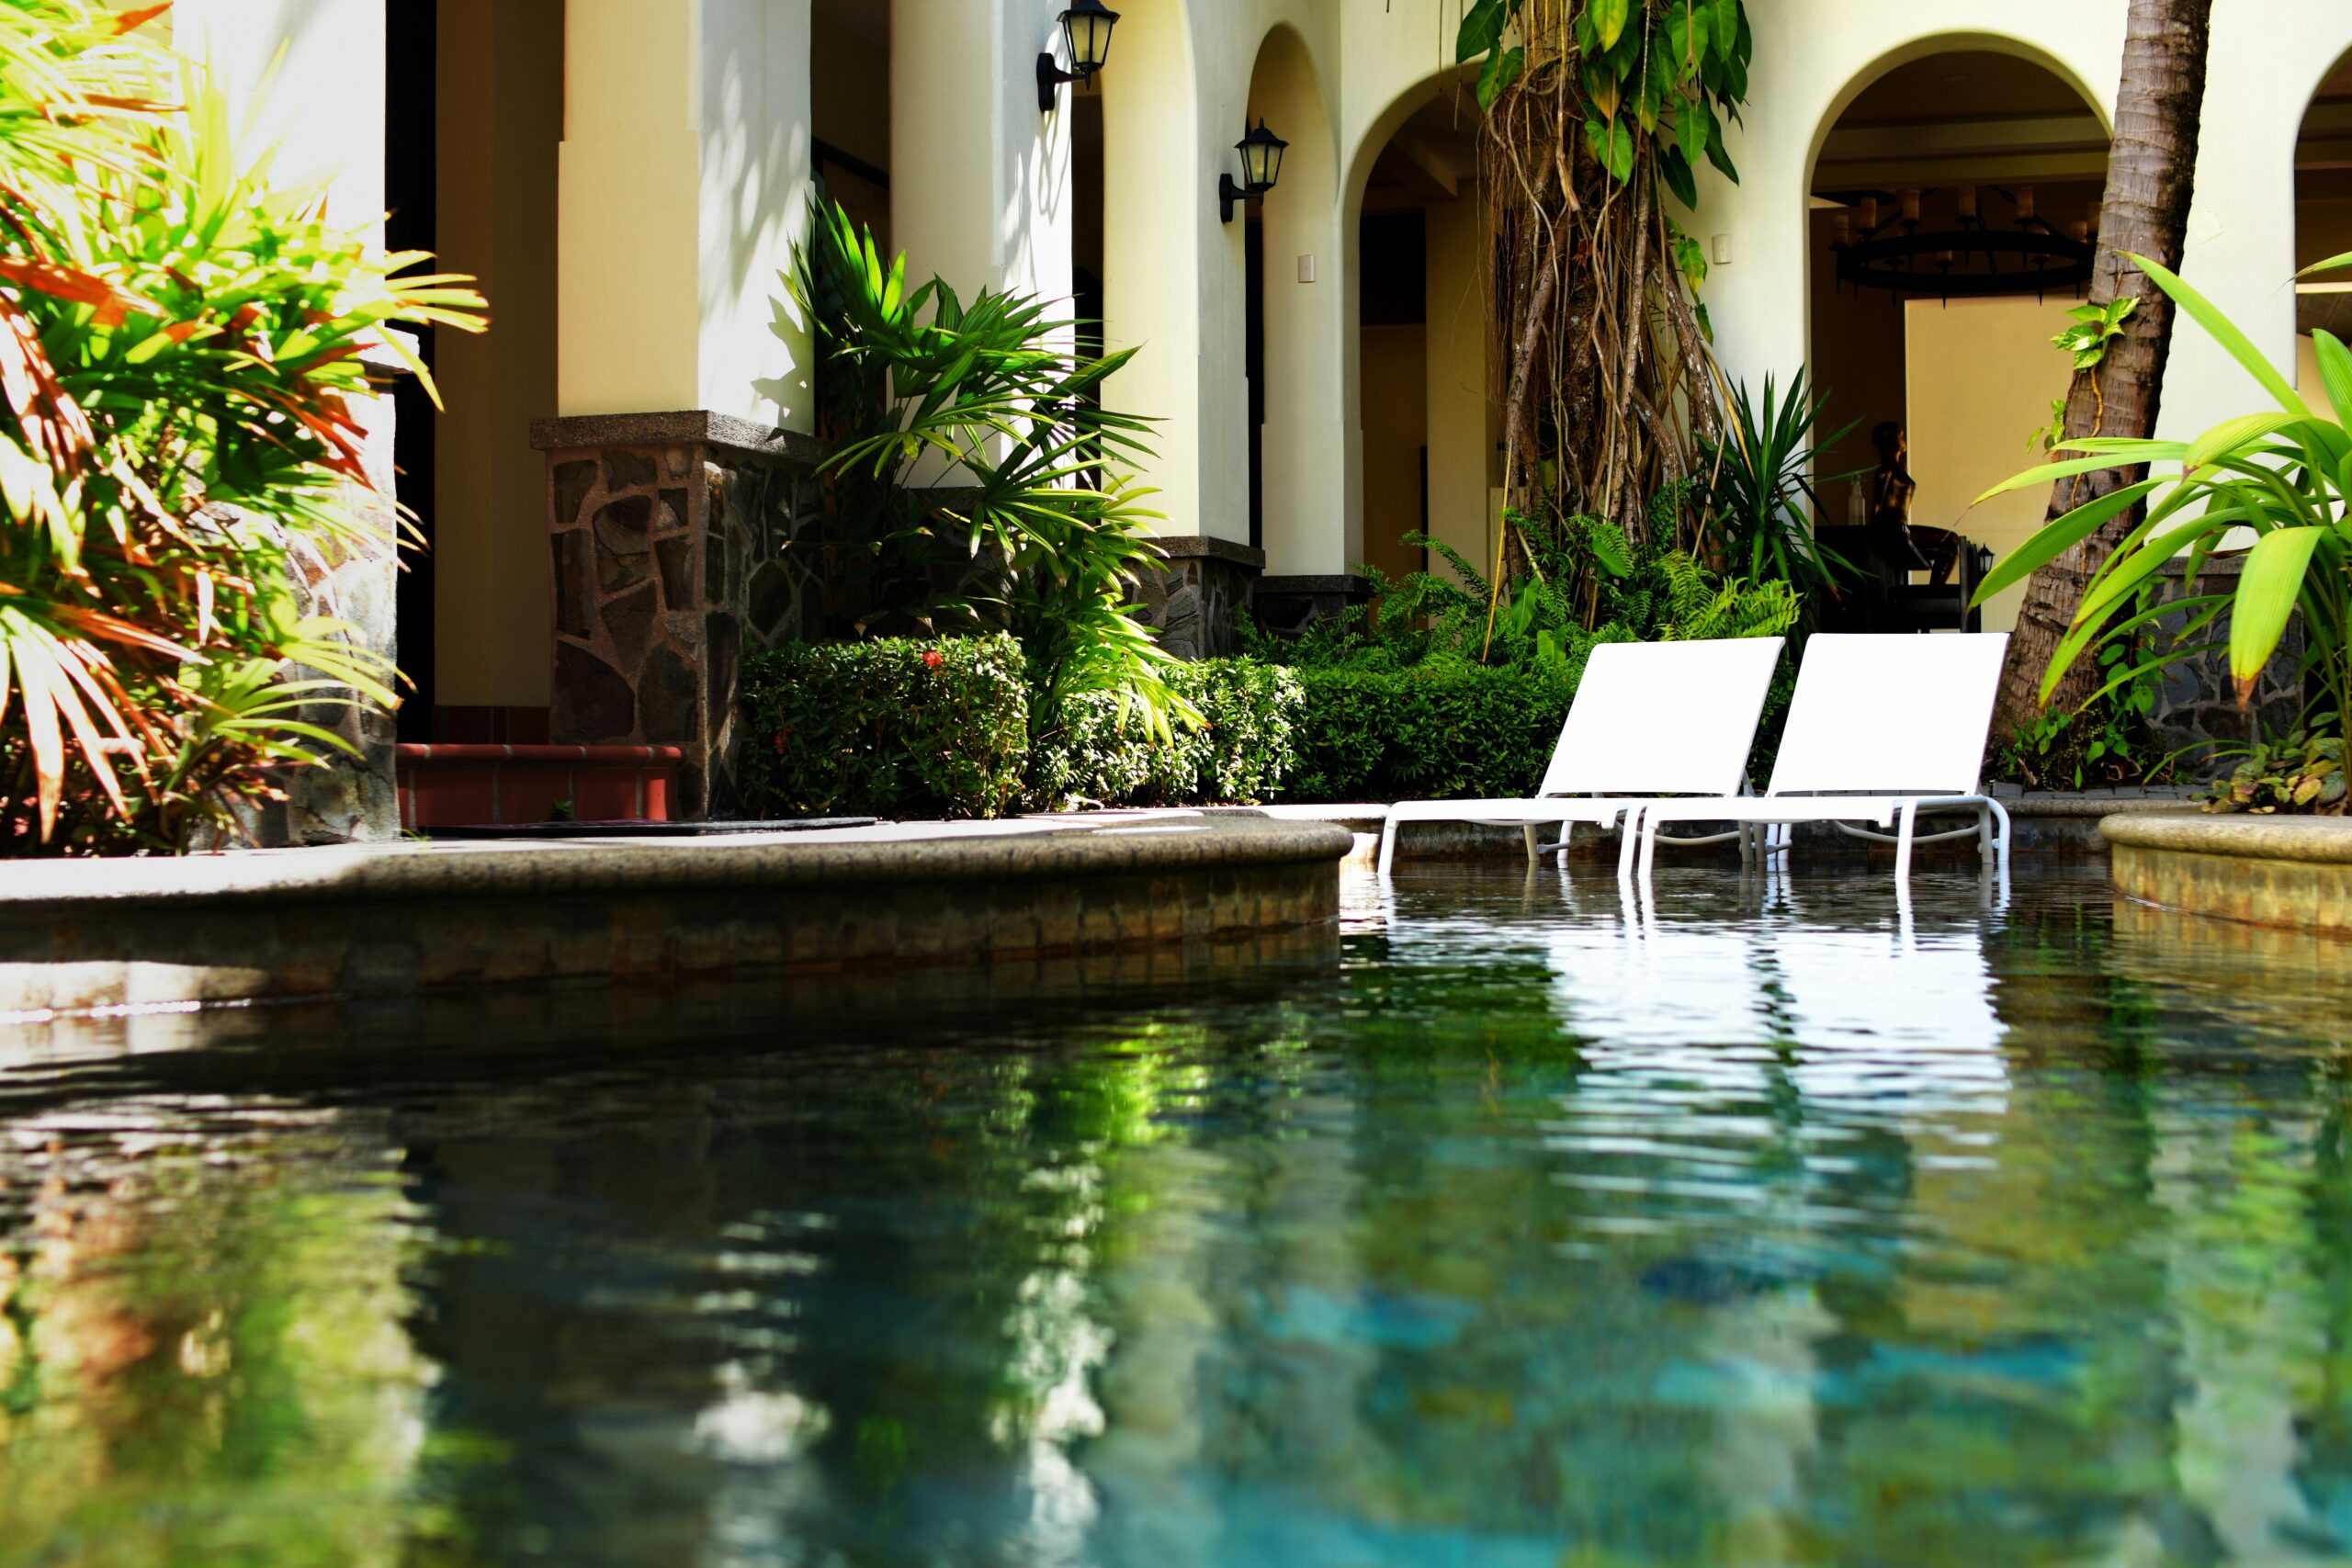 There are world class resorts in Costa Rica that are like paradises for travelers.
pictured: a luxurious resort pool